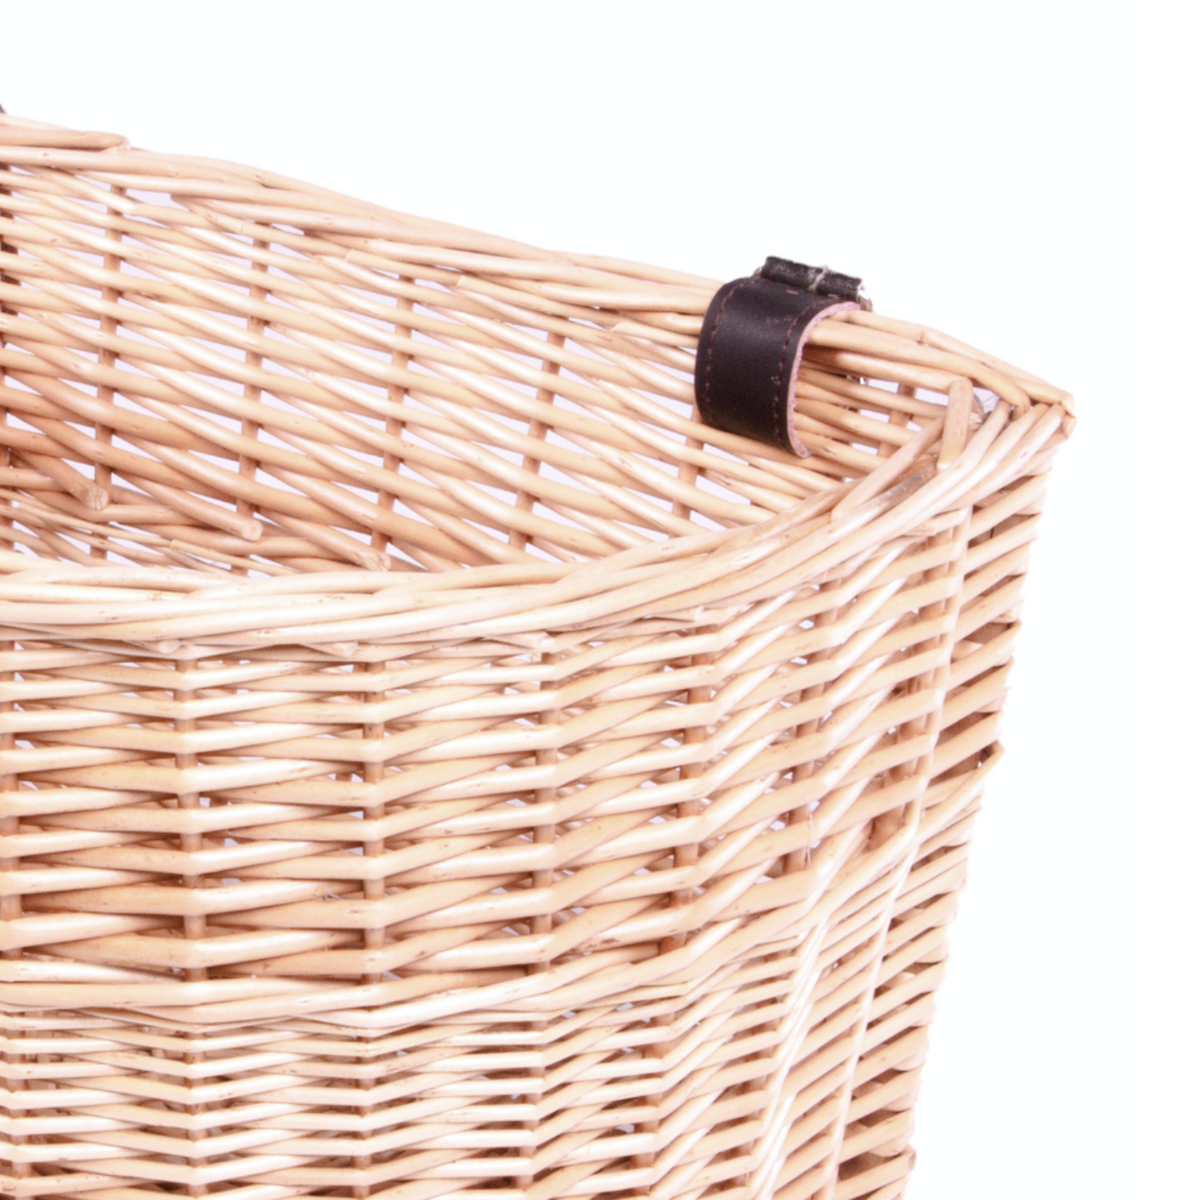 Willow Cycle Basket